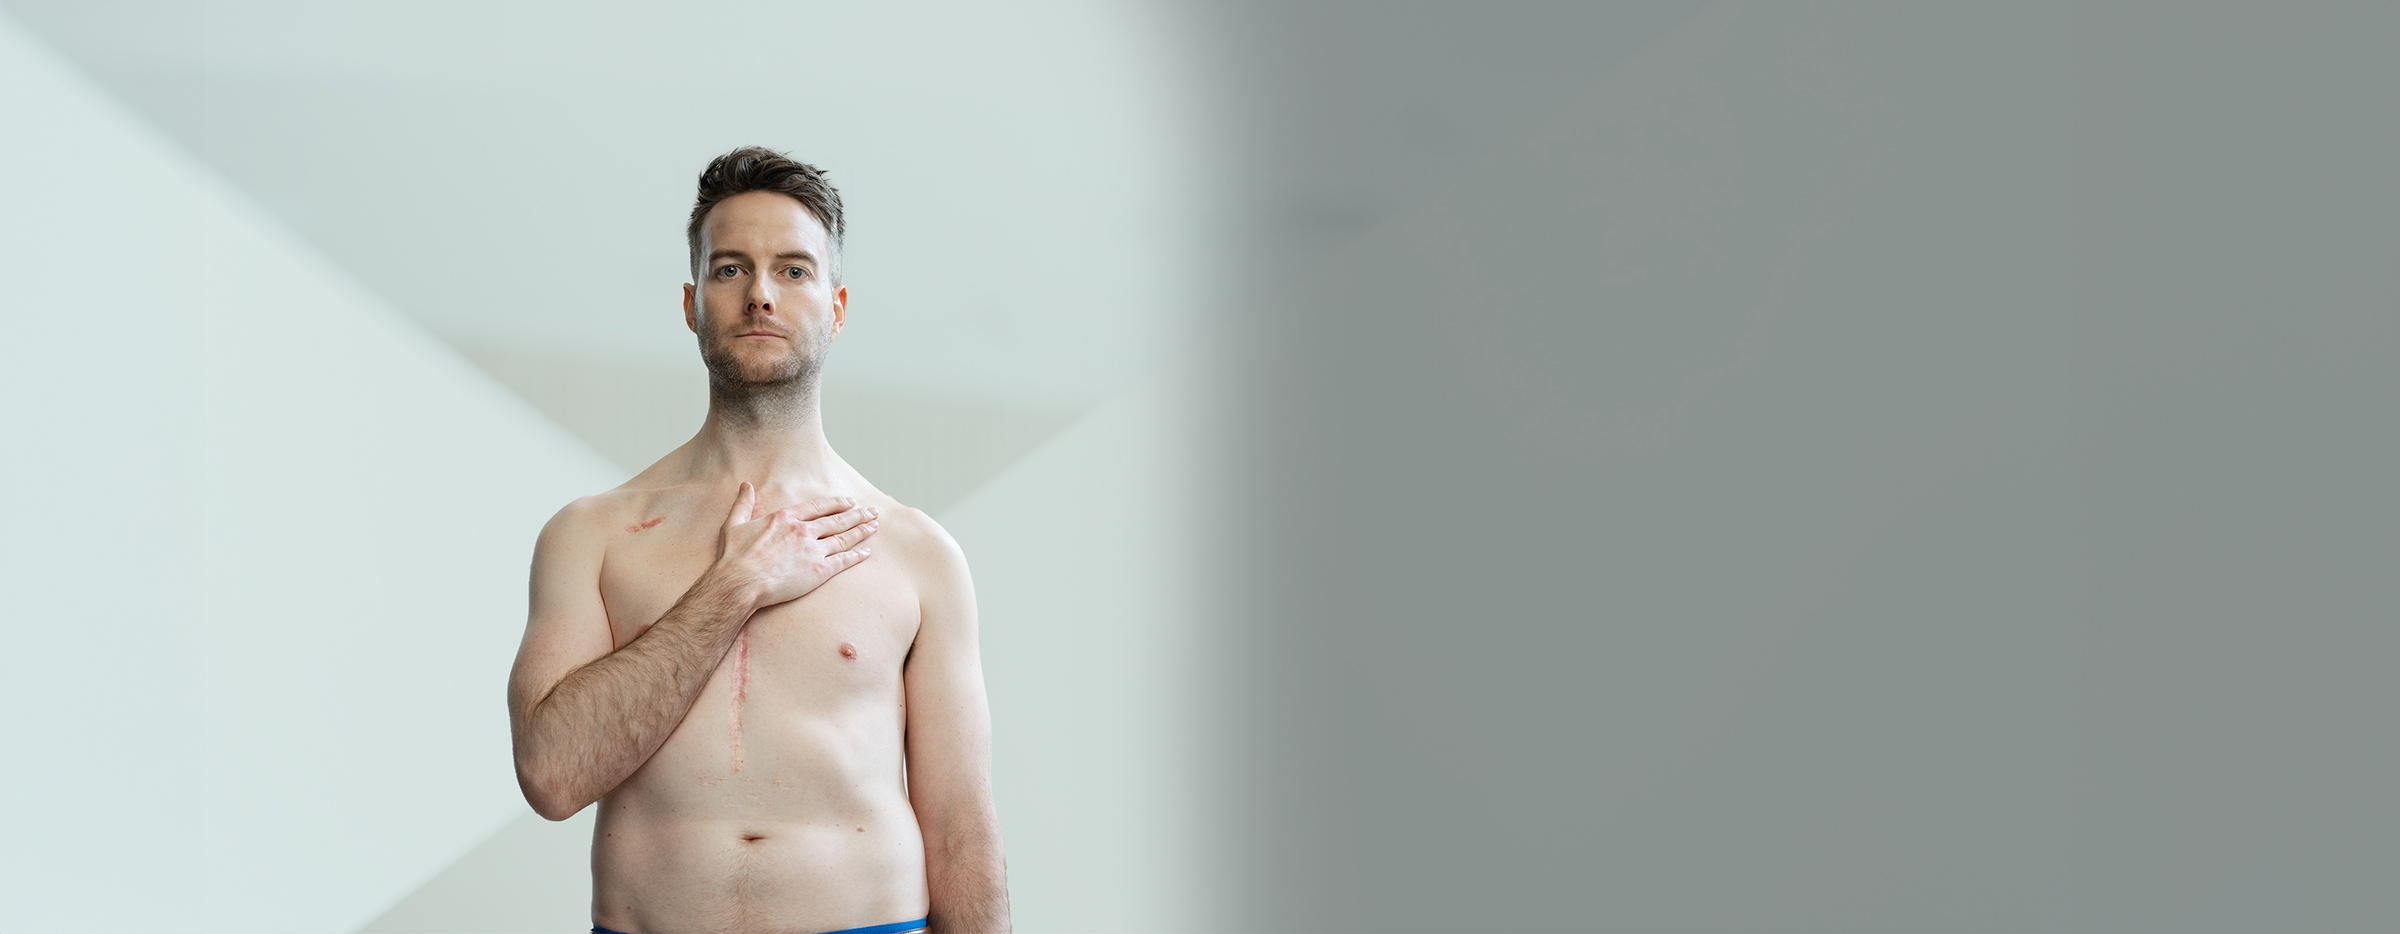 Geoff Lester shirtless with his hand on heart, visible scar from heart surgery